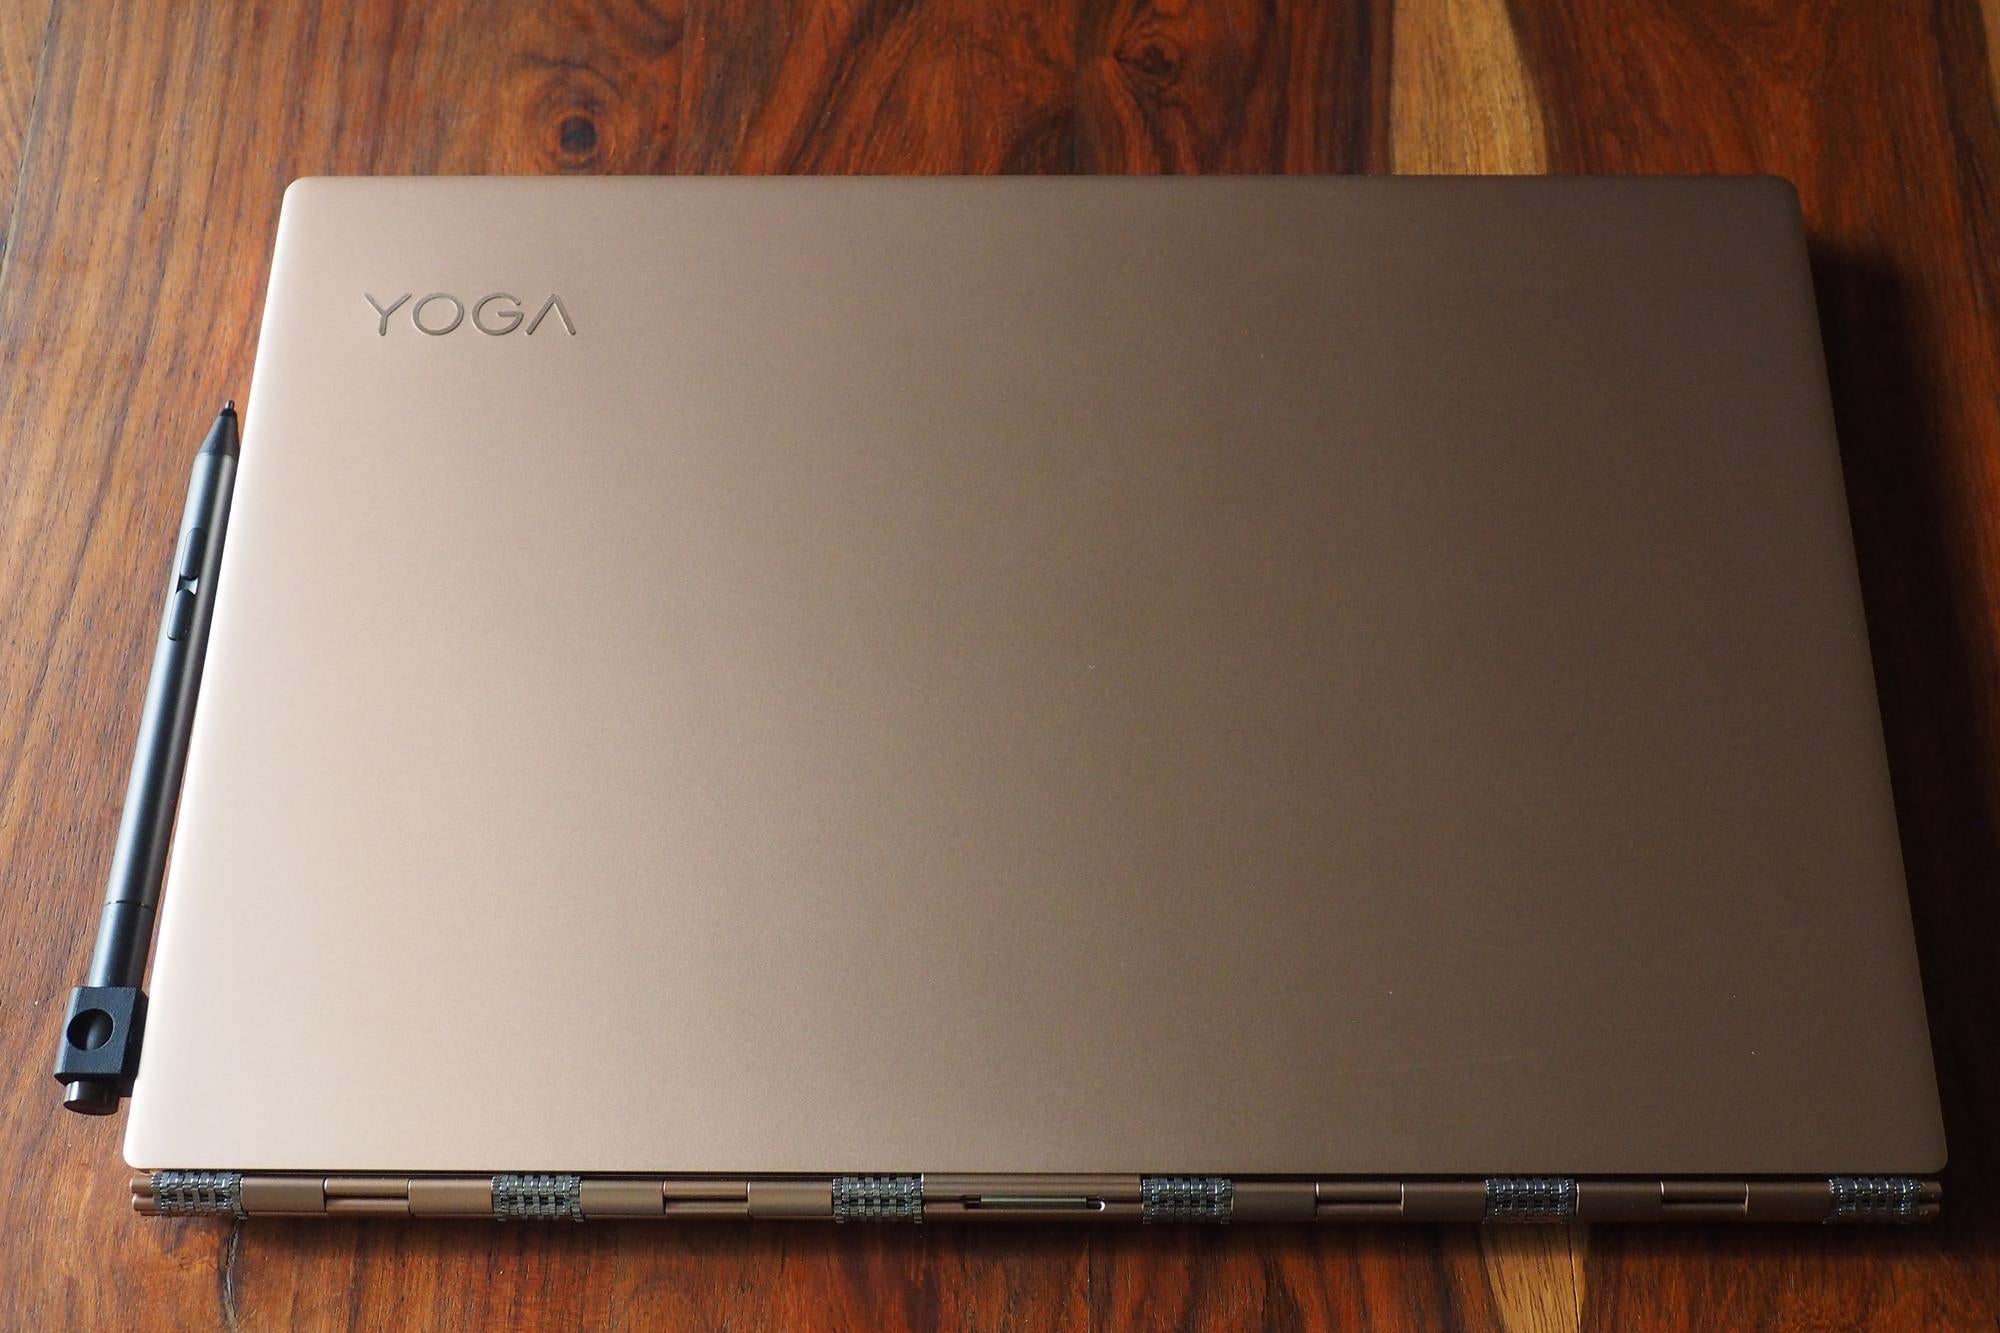 Lenovo Yoga 920 laptop closed on wooden surface with pen.